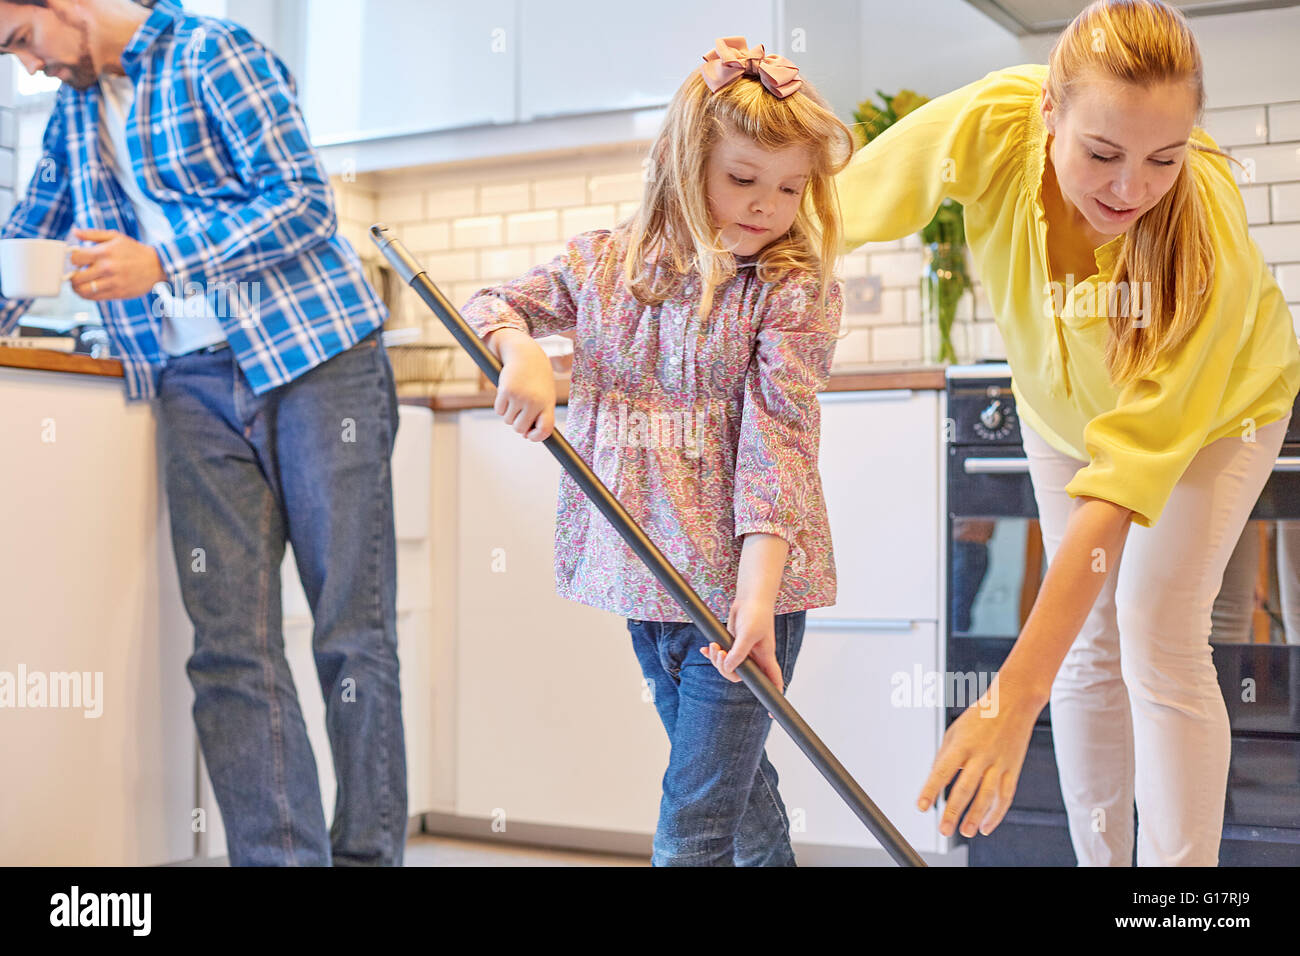 Mother and daughter mopping kitchen floor, father reading in background Stock Photo